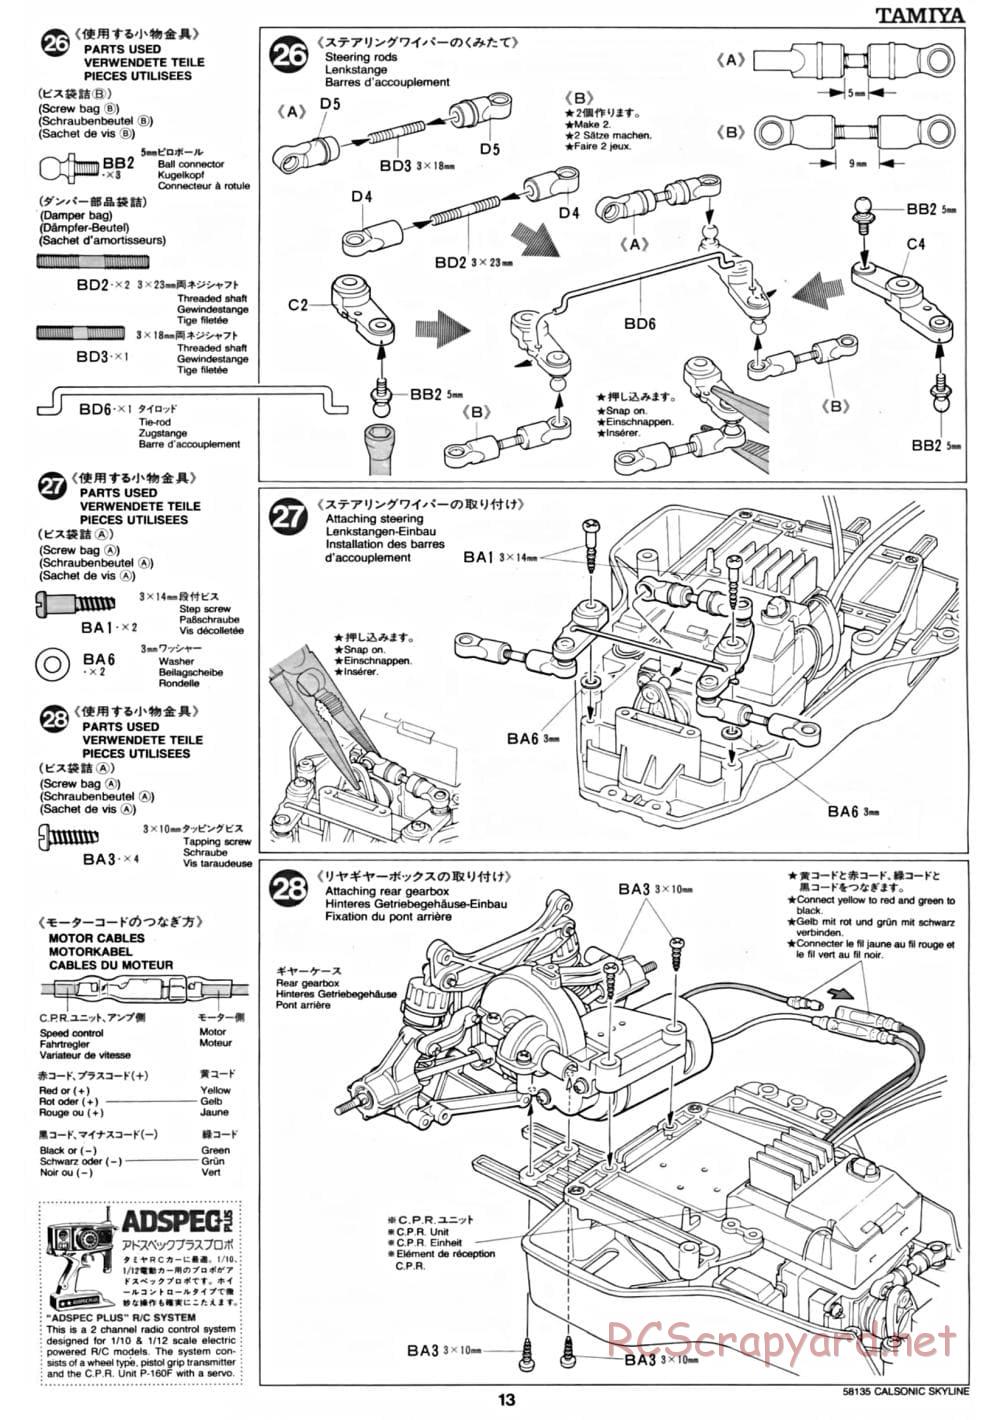 Tamiya - Calsonic Skyline GT-R Gr.A - TA-02 Chassis - Manual - Page 13